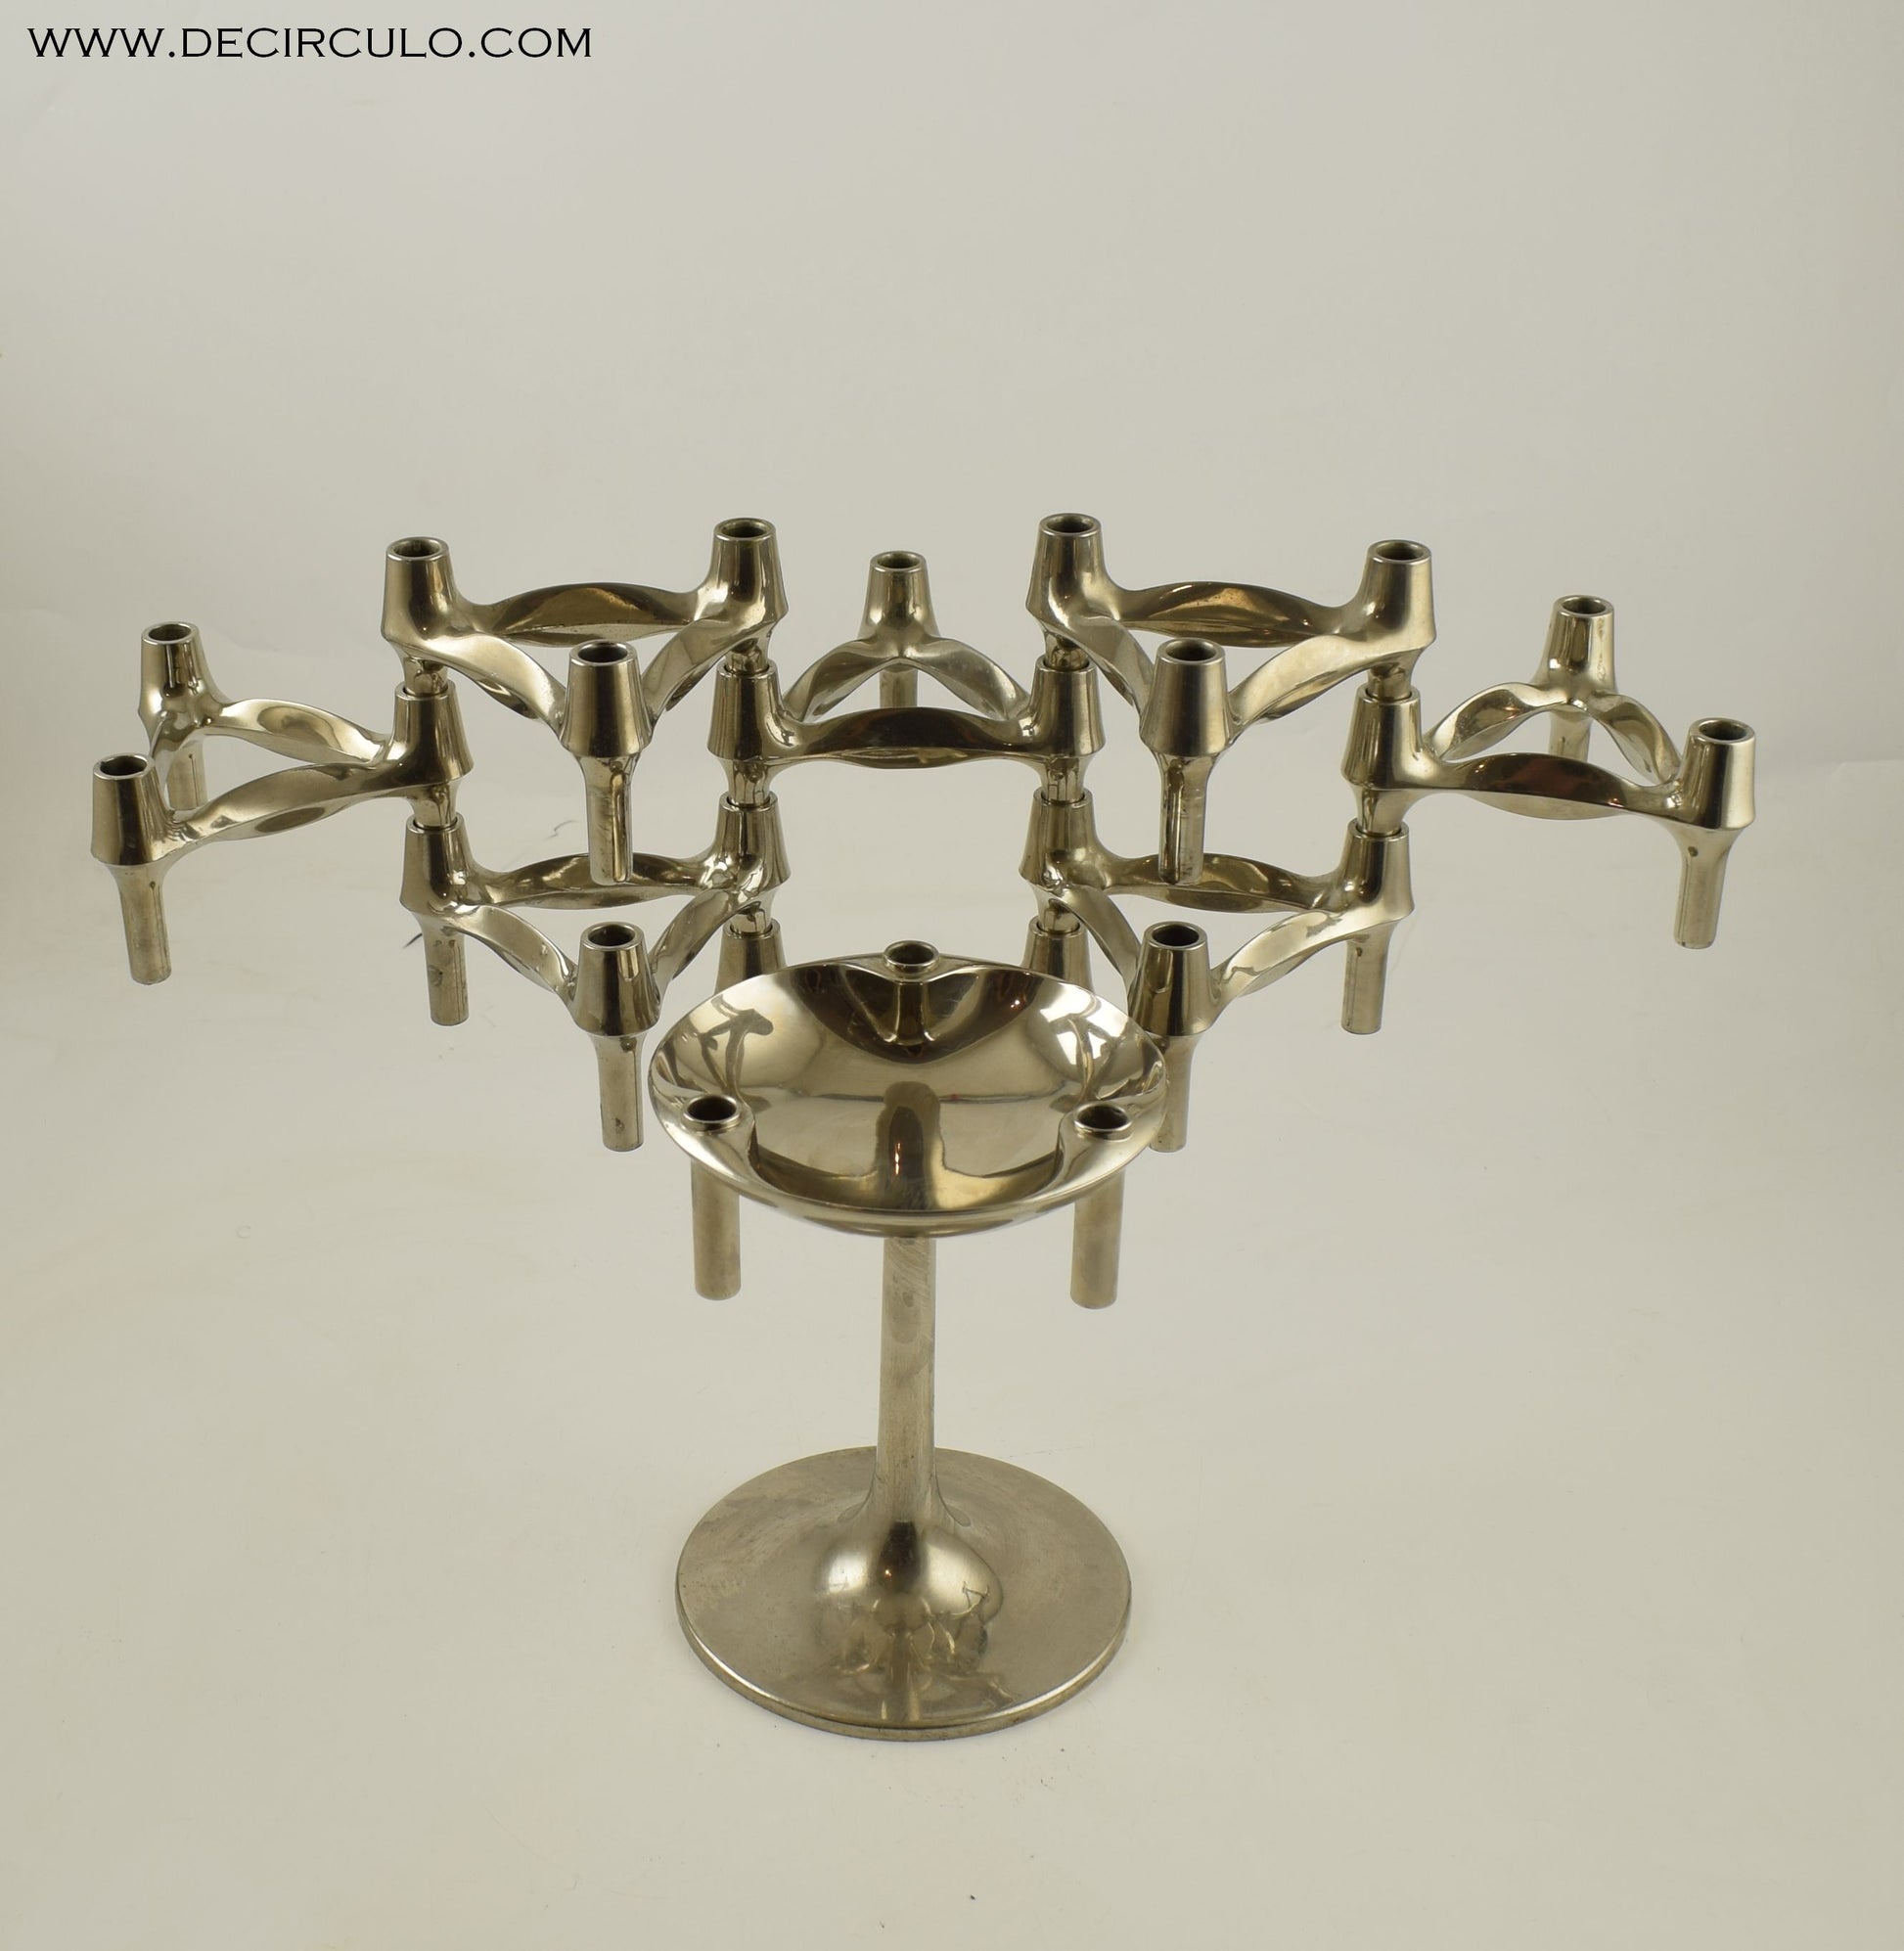 nagel candle holders heavy plus standand bowl decirculo